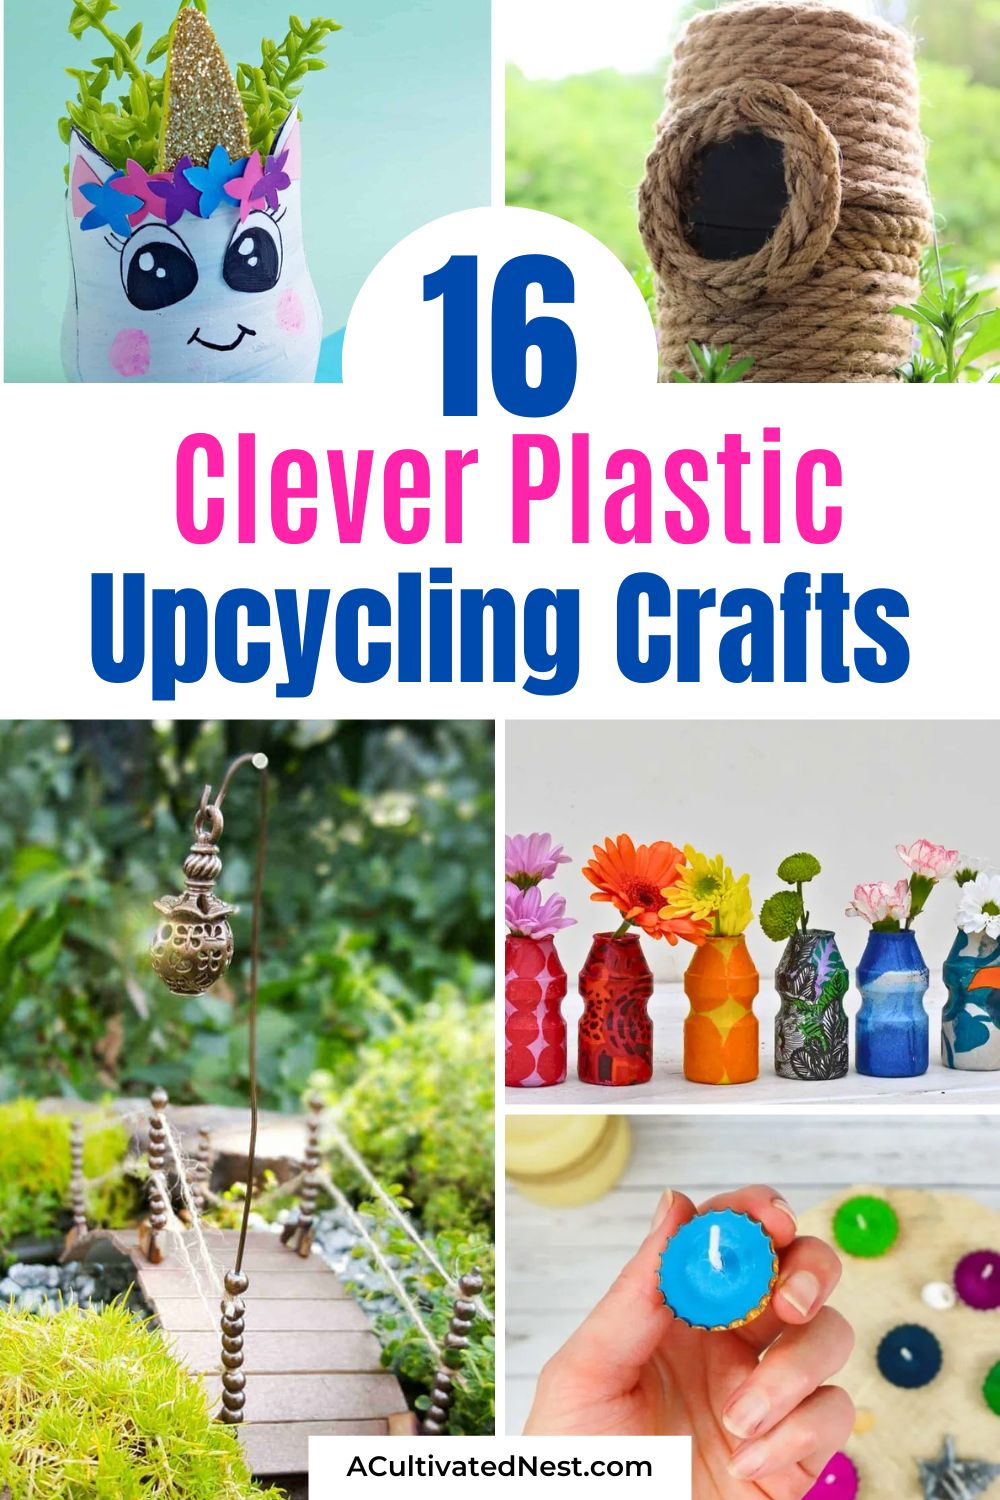 16 Clever Plastic Packaging Upcycle Crafts- Turn trash into treasure with these creative plastic packaging upcycle crafts! From soda bottles to yogurt containers, learn how to transform everyday waste into beautiful and useful creations. Get inspired to reduce waste and unleash your inner crafter today! | #DIYProjects #RecycleCrafts #CraftyIdeas #upcycling #ACultivatedNest